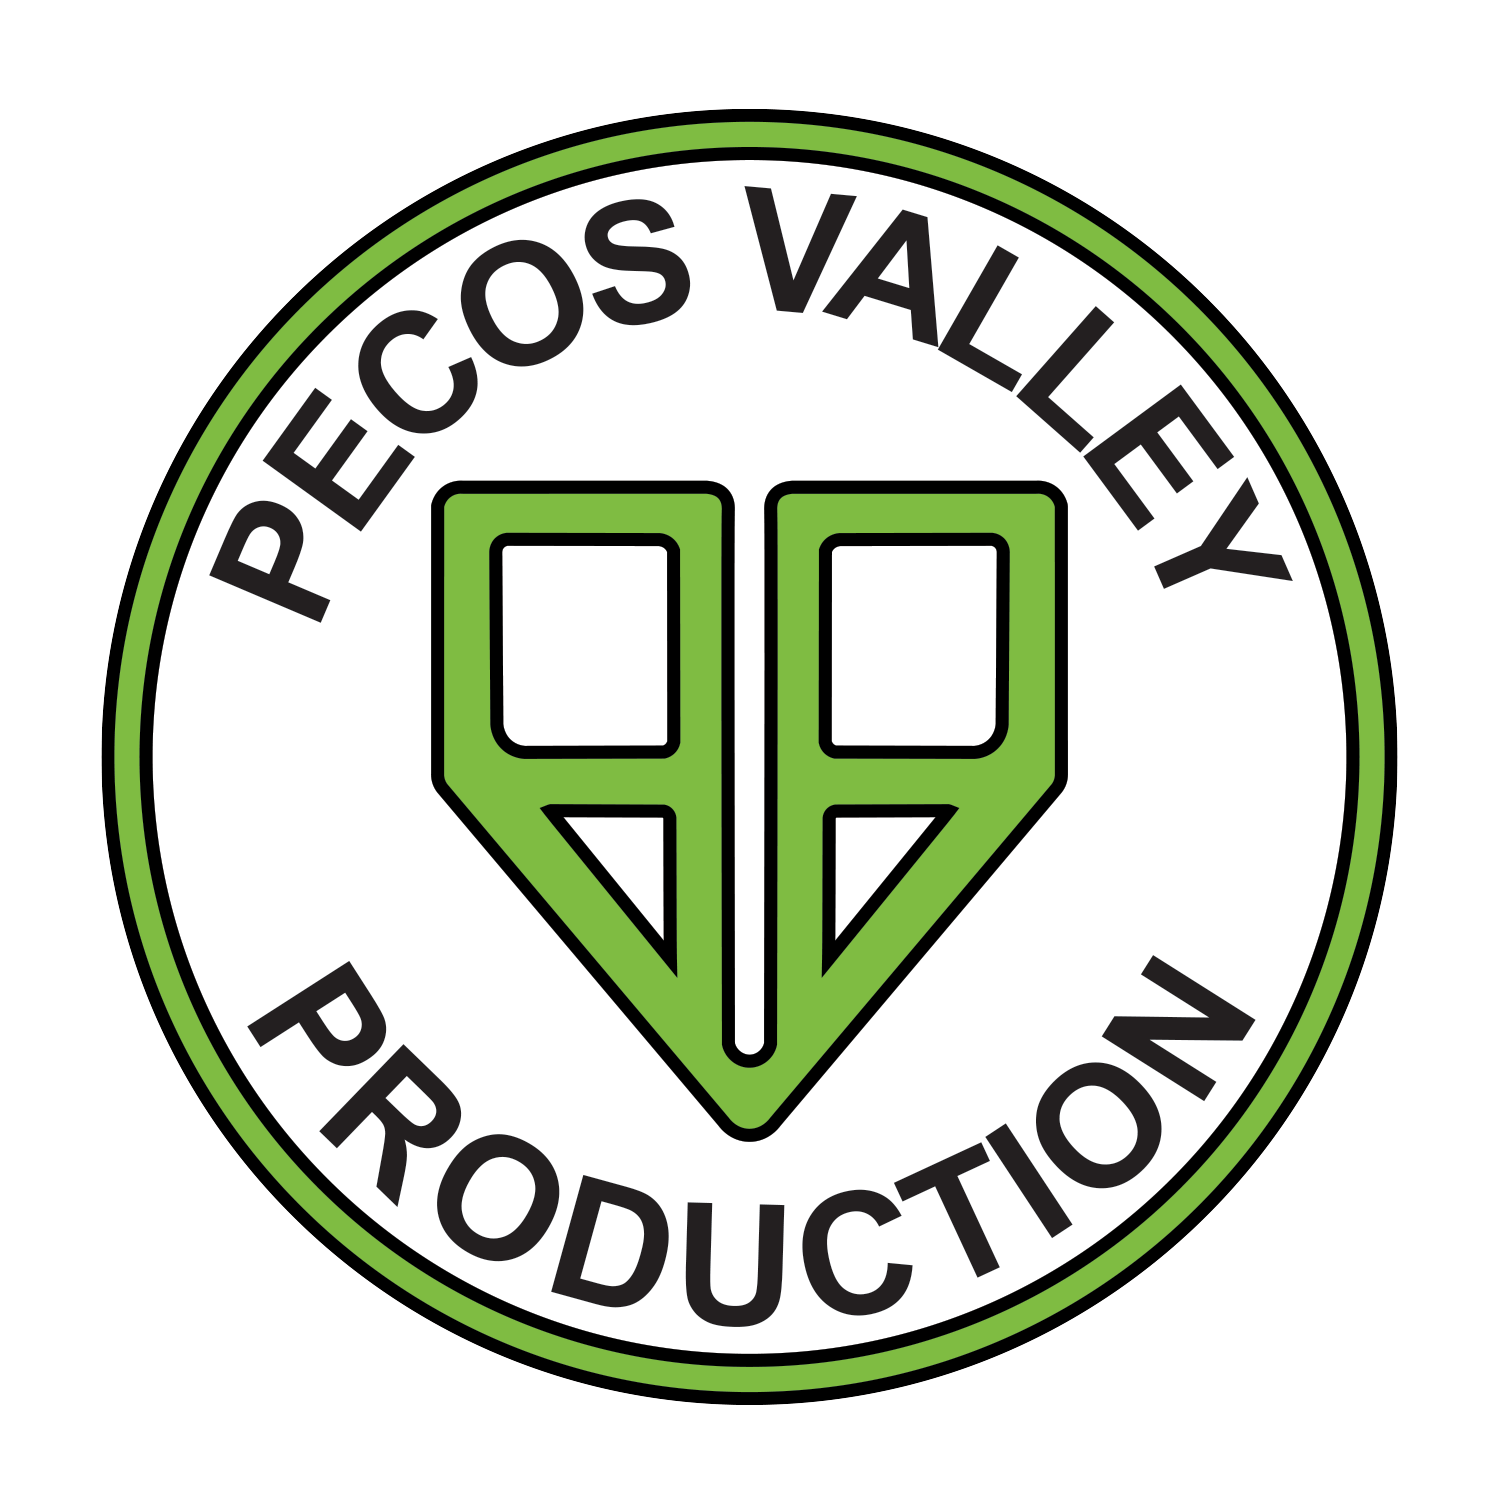 Pecos Valley Production - Roswell Main